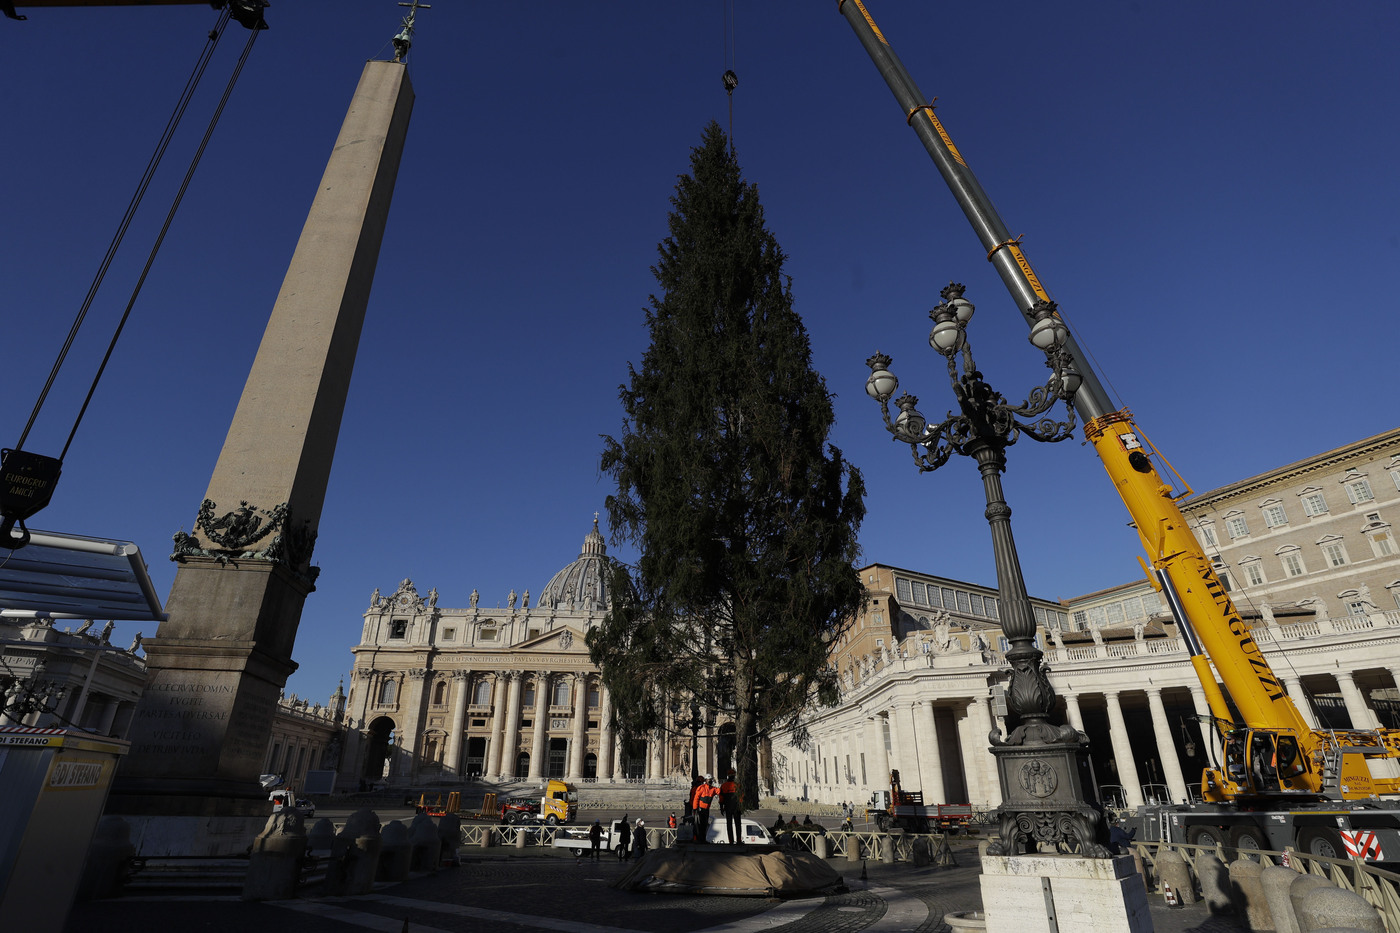 A crane lifts a 28mt (91feet) tall fir tree in St. Peter's Square, at the Vatican, Monday, Nov. 30, 2020. The tree, which will be trimmed as a Christmas tree, comes from Kocevje, Slovenia. (AP Photo/Gregorio Borgia)